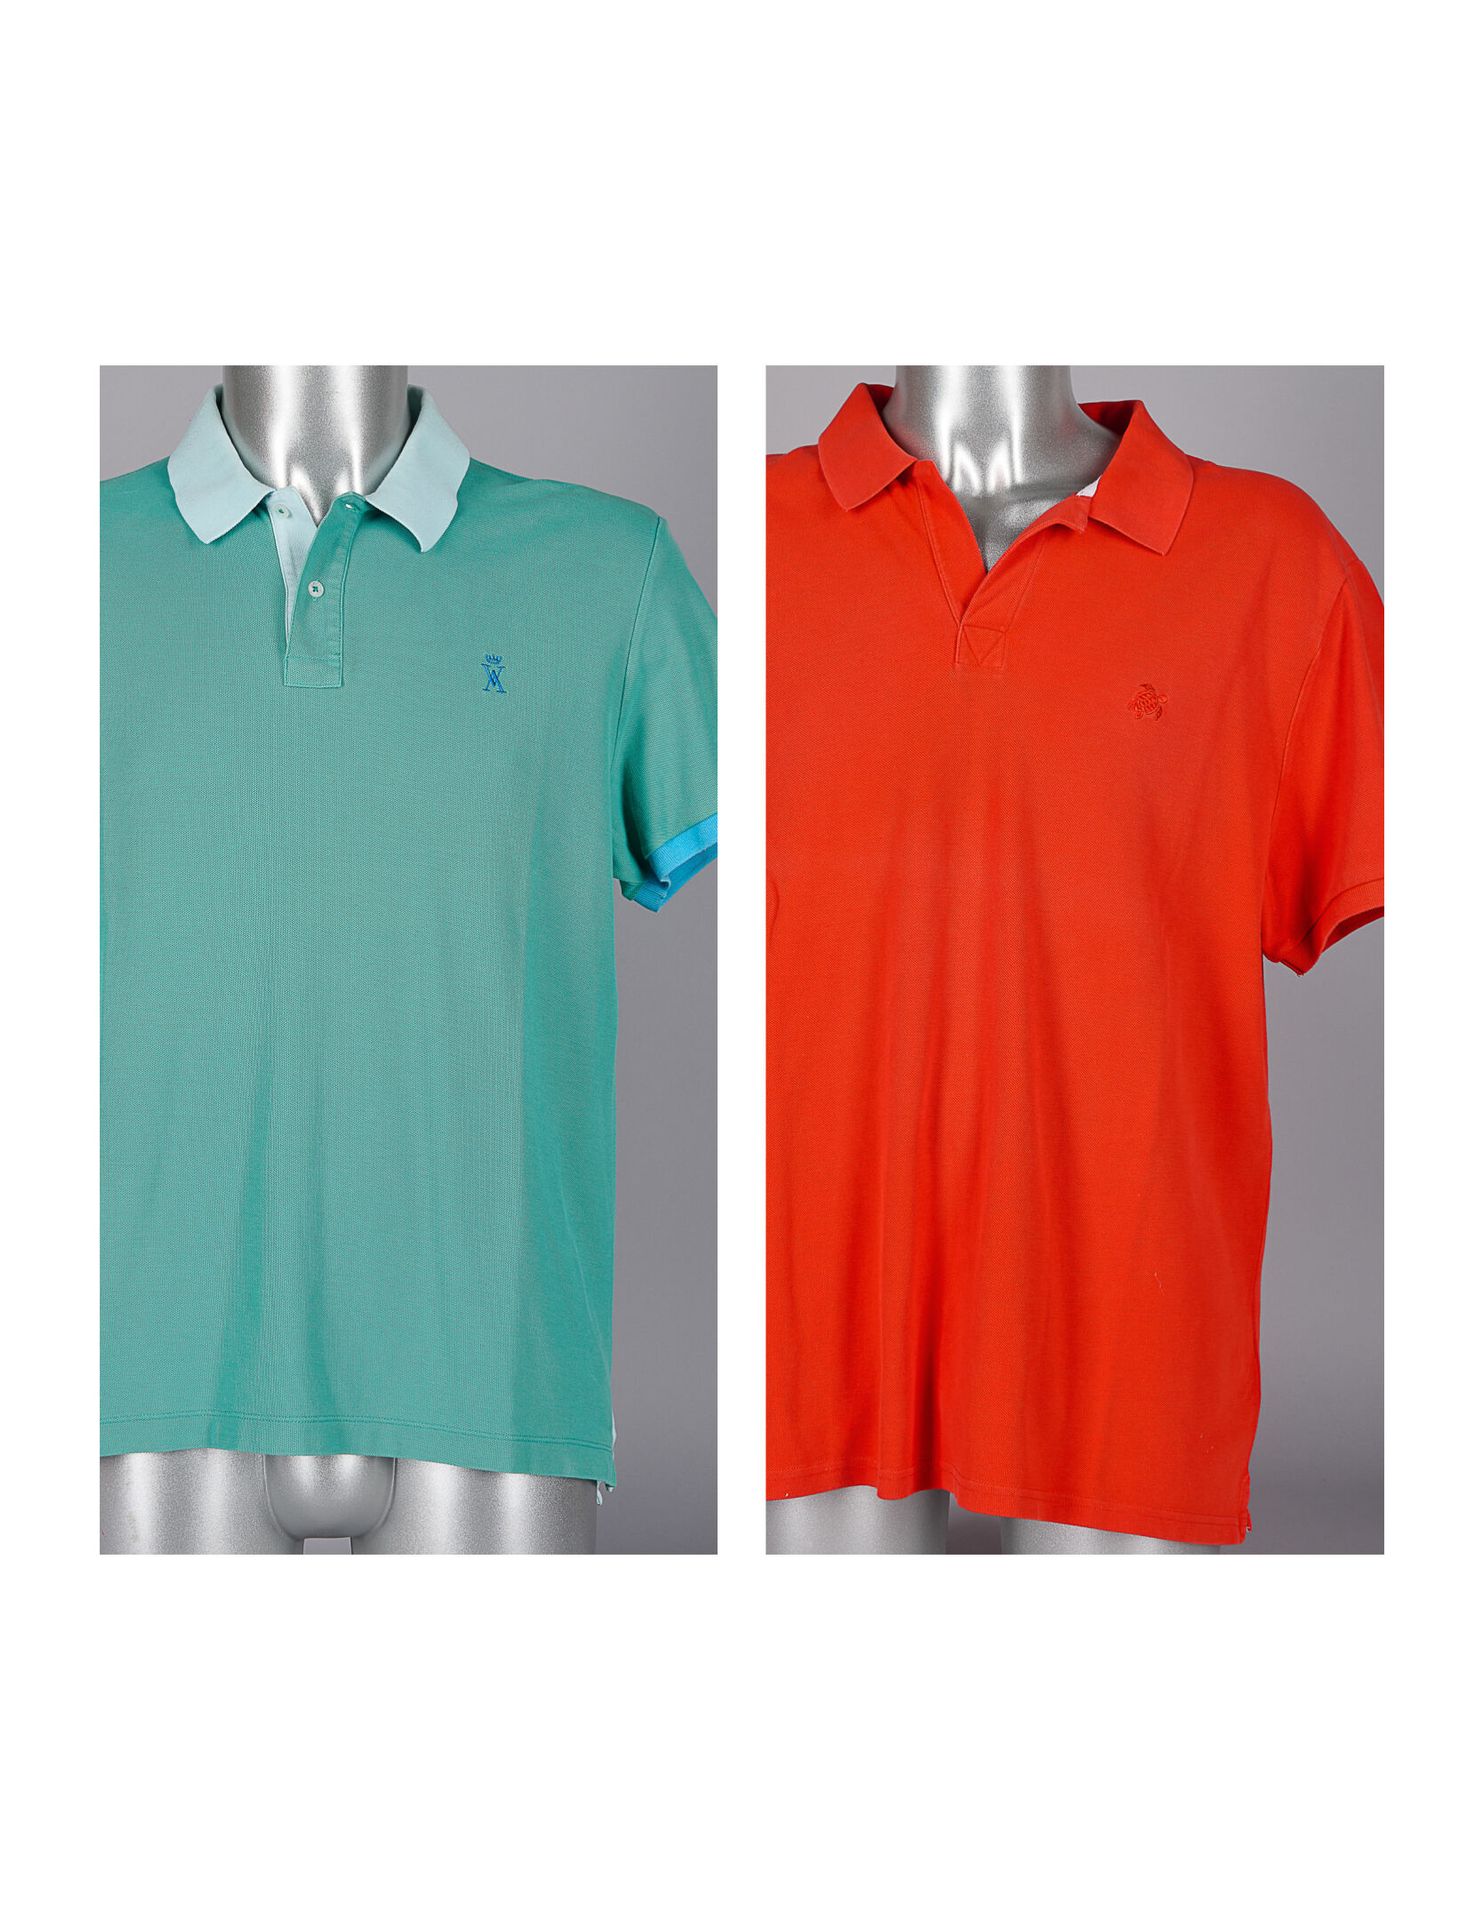 VICOMTE A., VILEBREQUIN TWO POLOS in honeycomb cotton: the first one jade and bl&hellip;